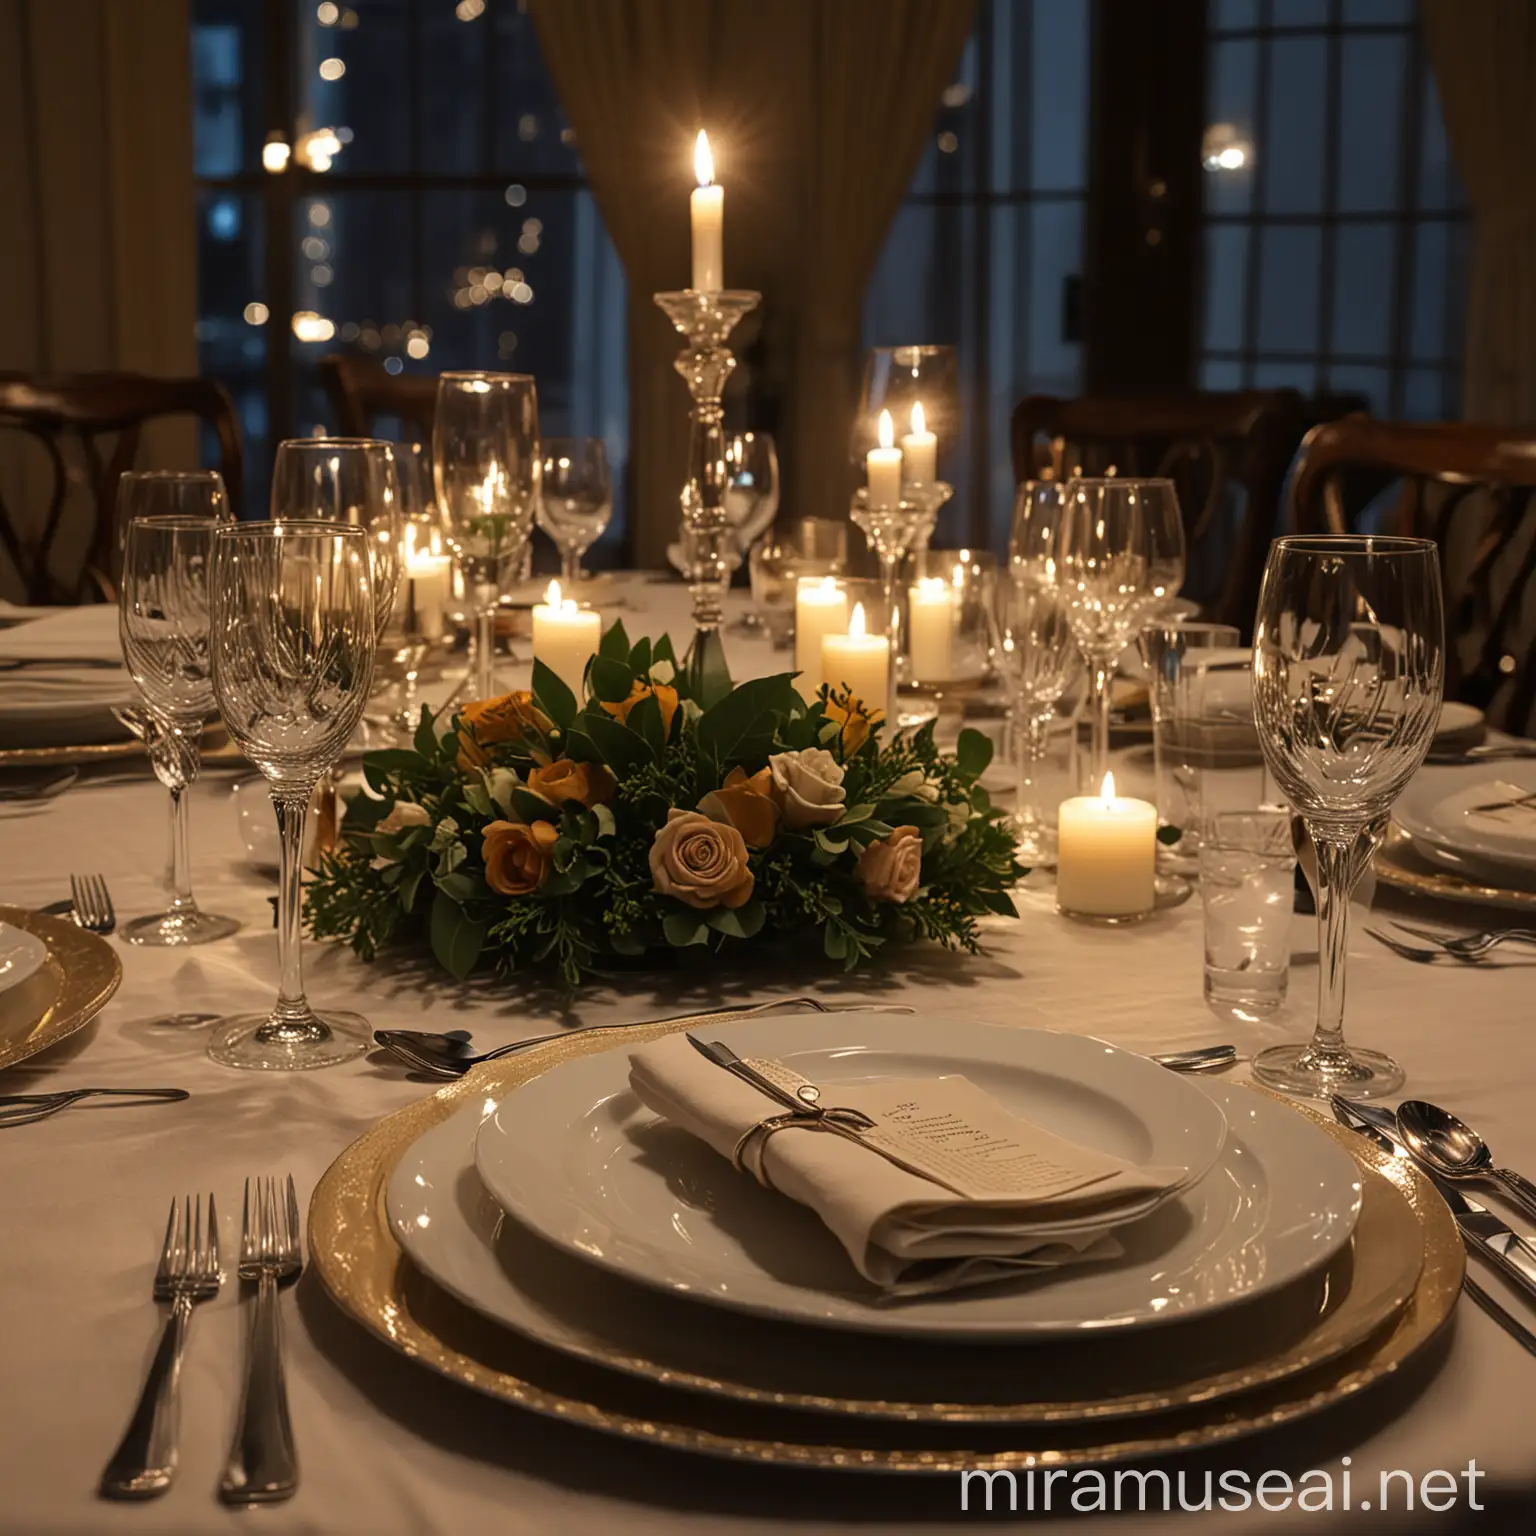 Fancy Dinner table, close up, at night, dim light

